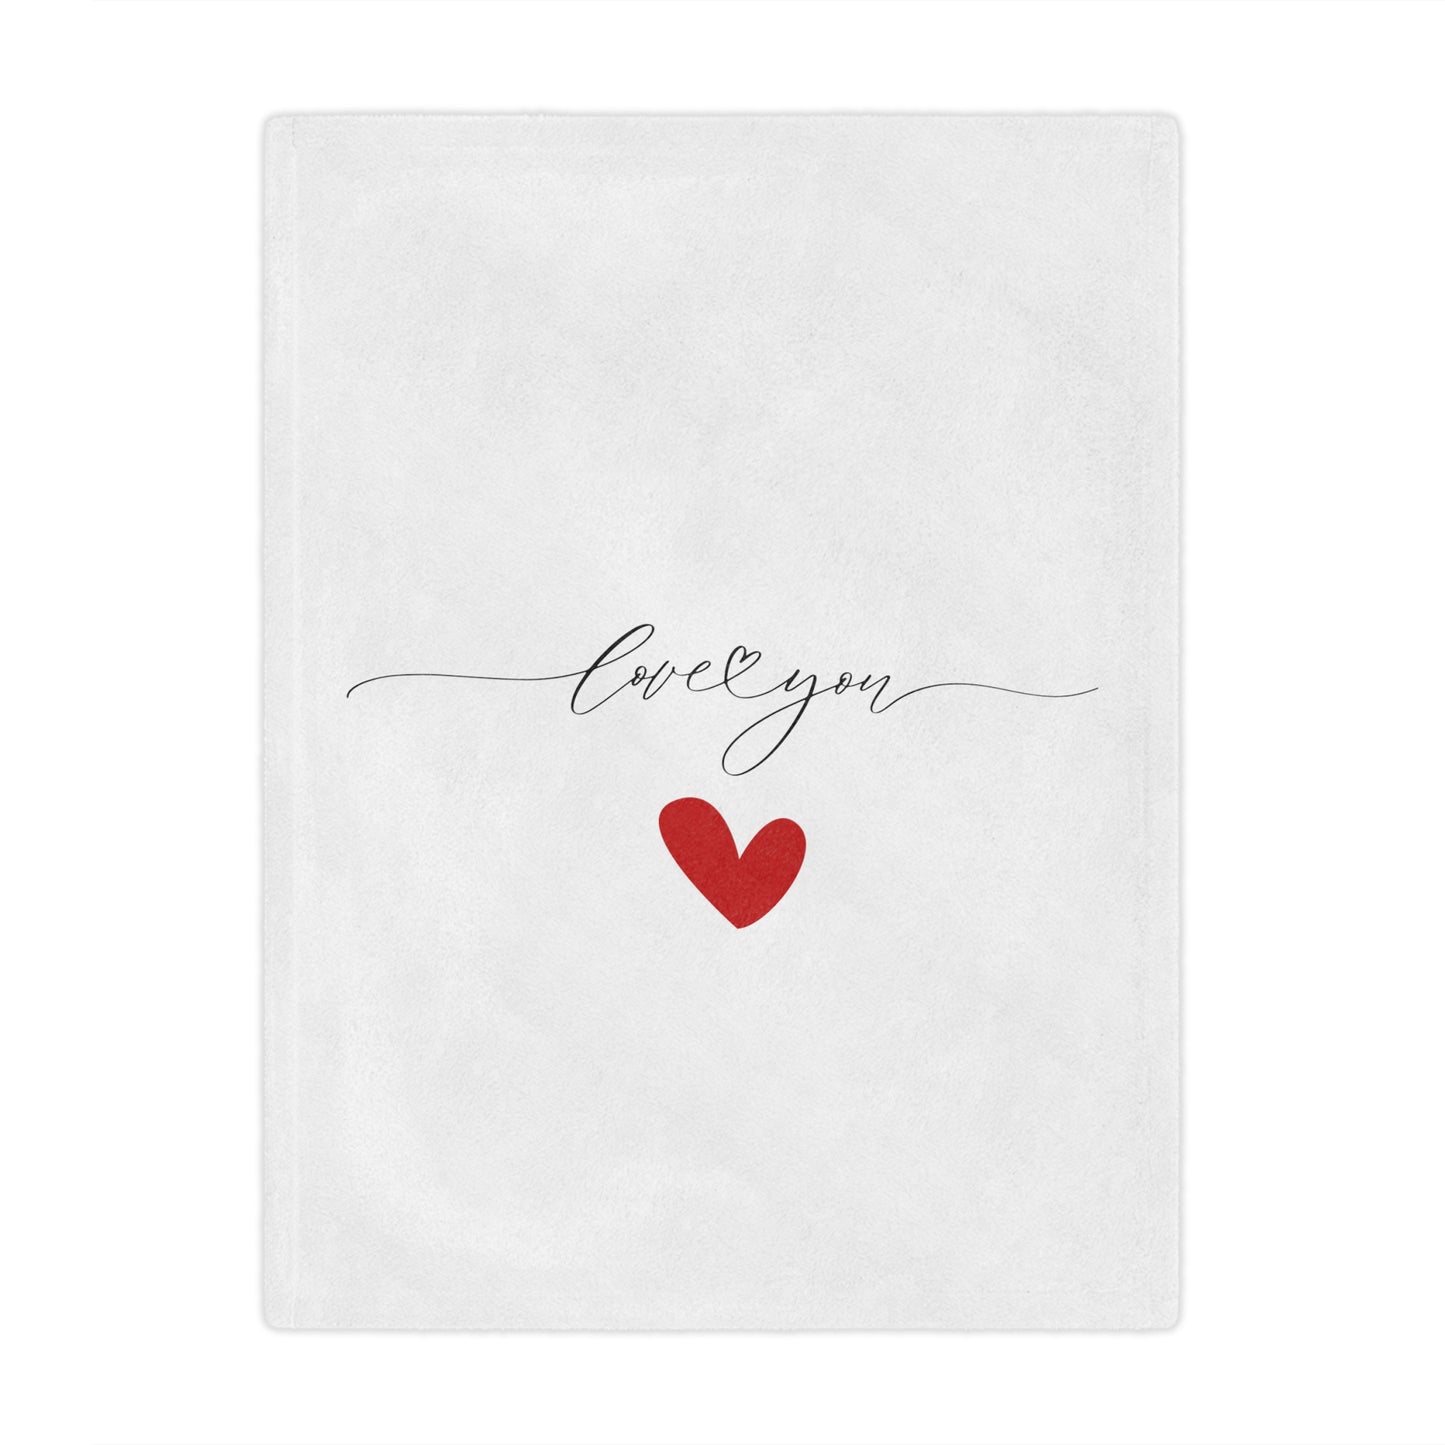 Love You Signature with Heart Printed Velveteen Minky Blanket for Valentine